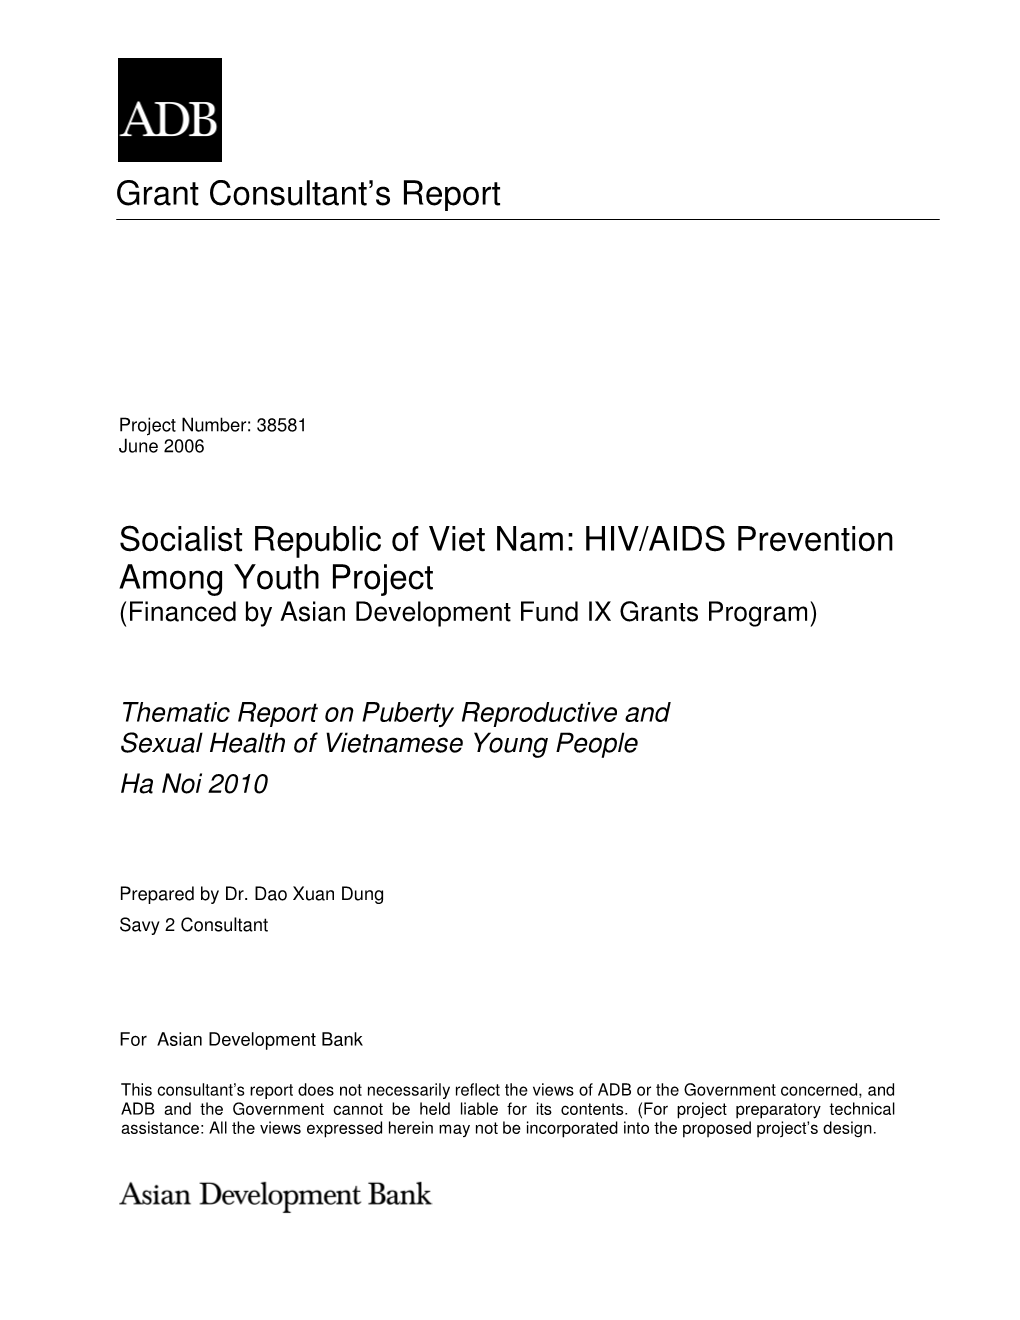 TACR: Viet Nam: HIV/AIDS Prevention Among Youth Project